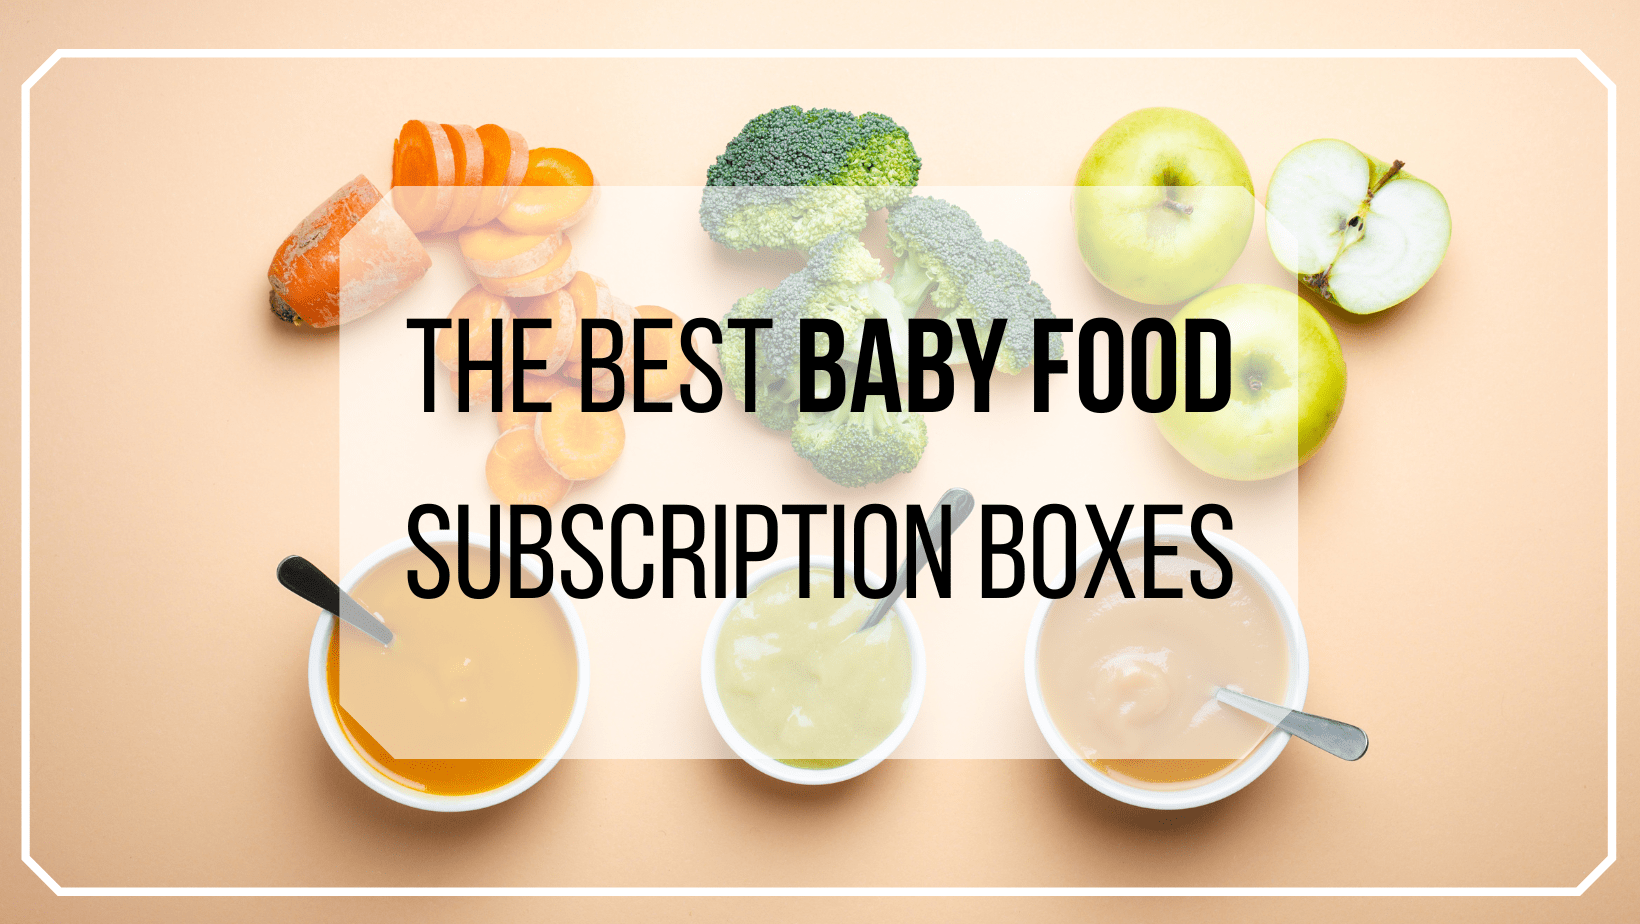 No Time to Cook? Try One of These Baby Meal Delivery Services